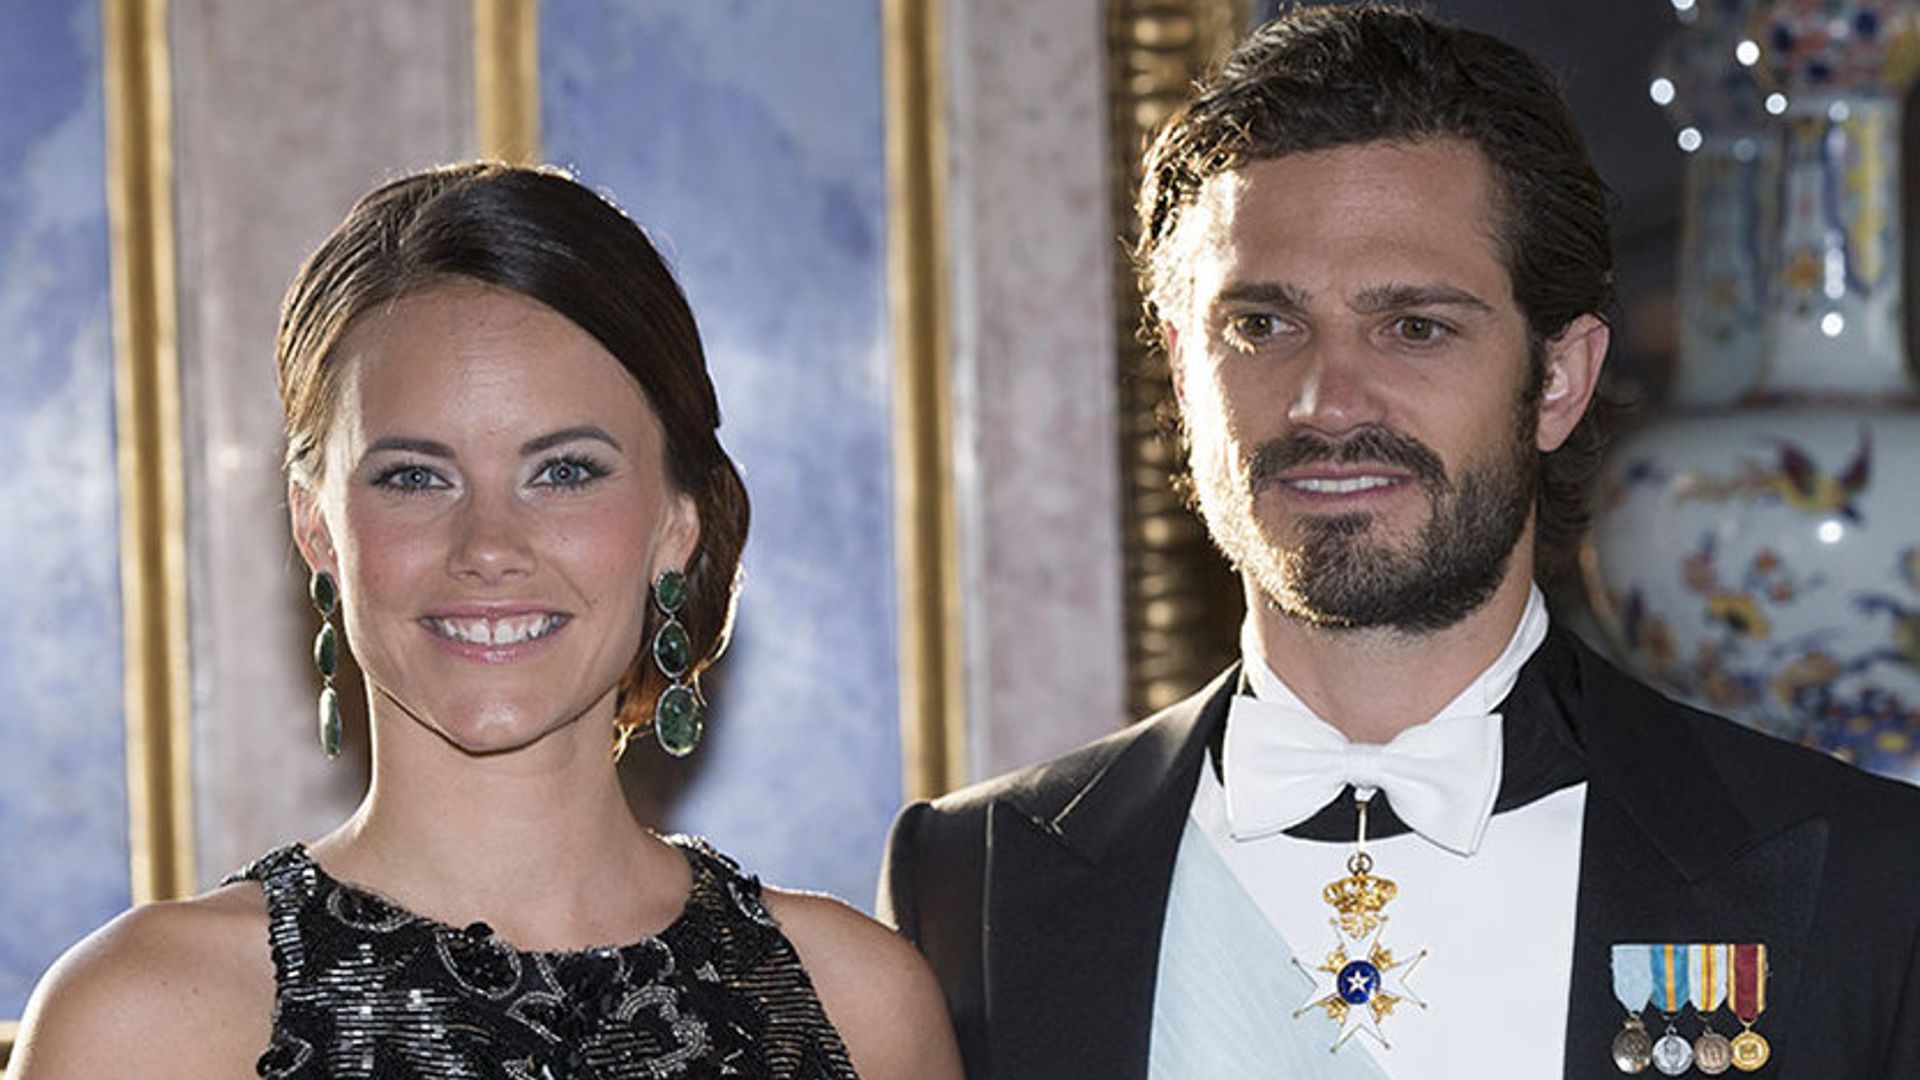 Sofia Hellqvist joins Sweden's King and Queen at Palace gala